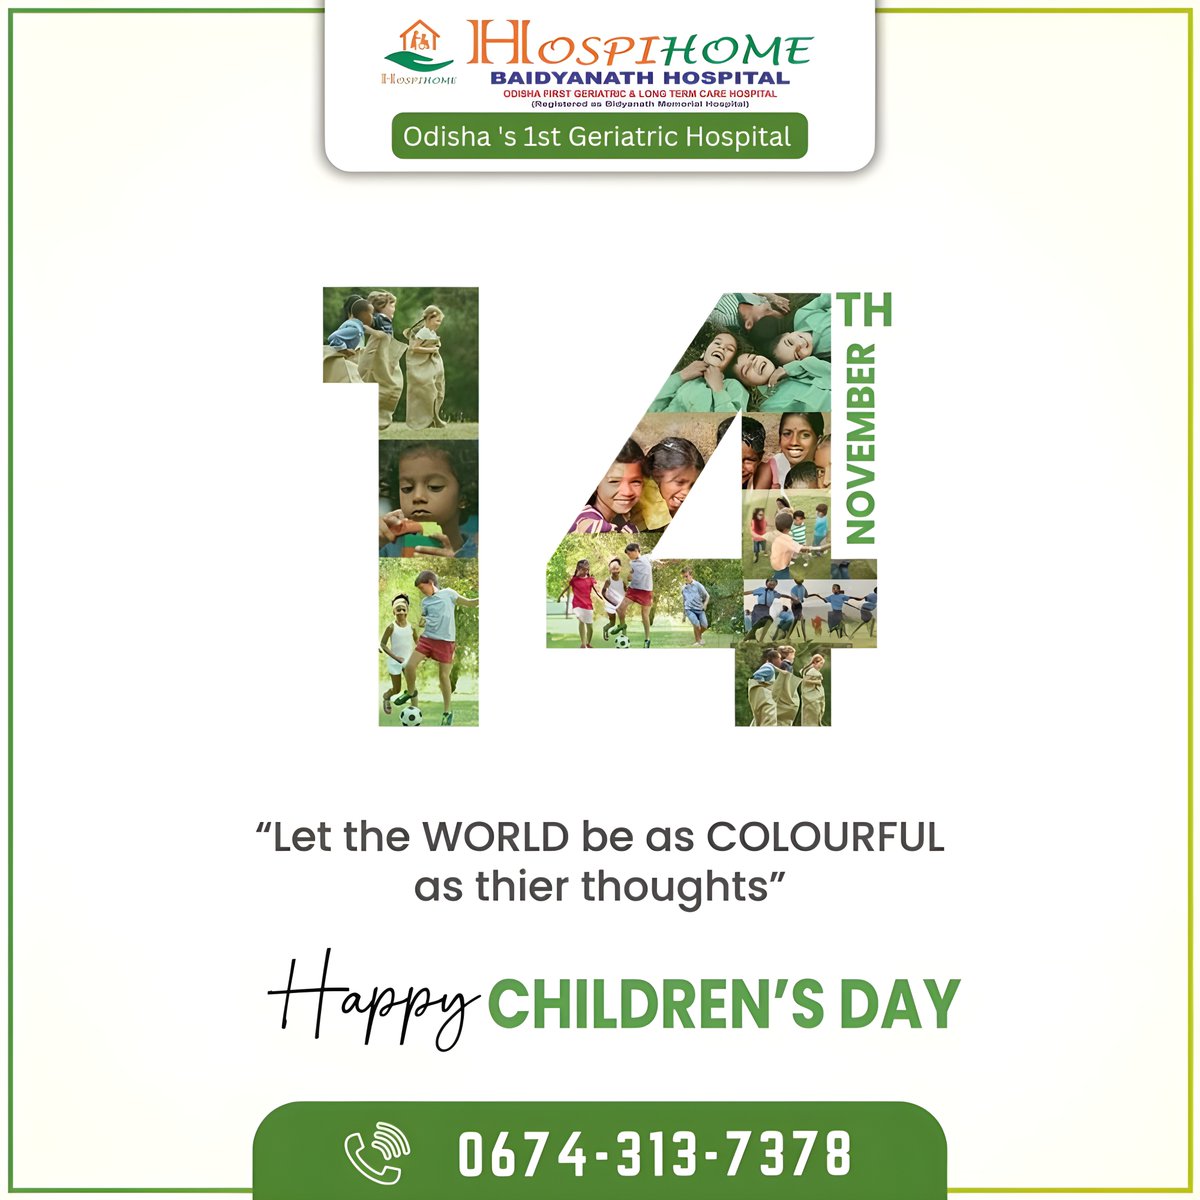 #Happy_Childrens_Day
Every child is special. Children's Day, also known as 'Bal Diwas' is celebrated across India every year on November 14. 
#ChildrensDay #celebrationtime #childhood #everychildcounts #SpecialDay #BirthAnniversary #JawaharlalNehru #Nov14 #EducationForAll